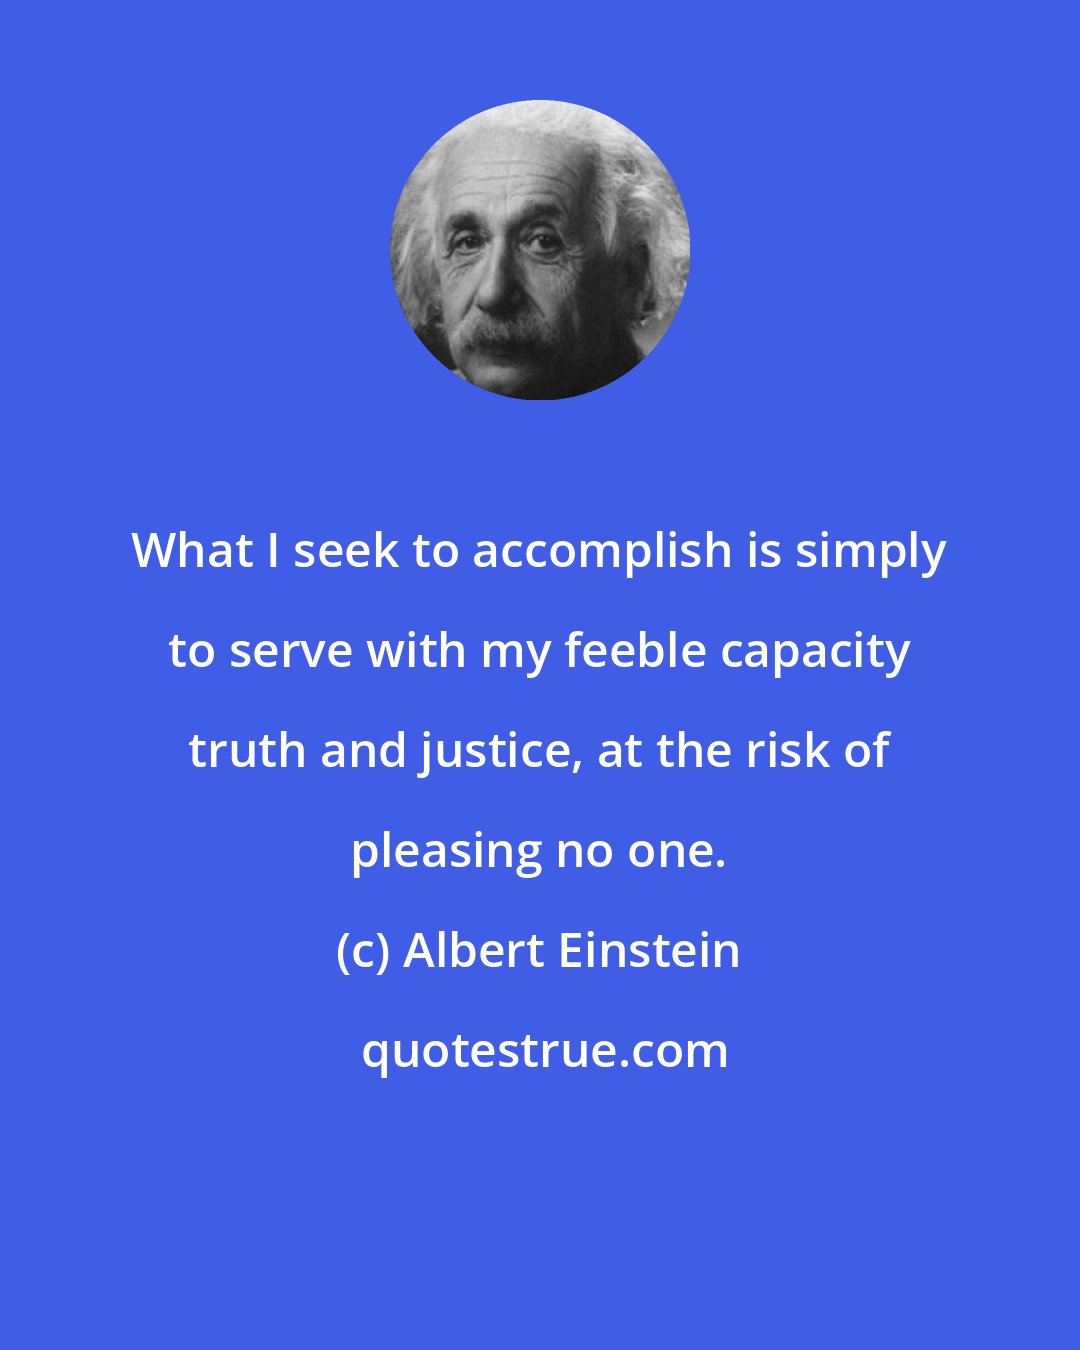 Albert Einstein: What I seek to accomplish is simply to serve with my feeble capacity truth and justice, at the risk of pleasing no one.